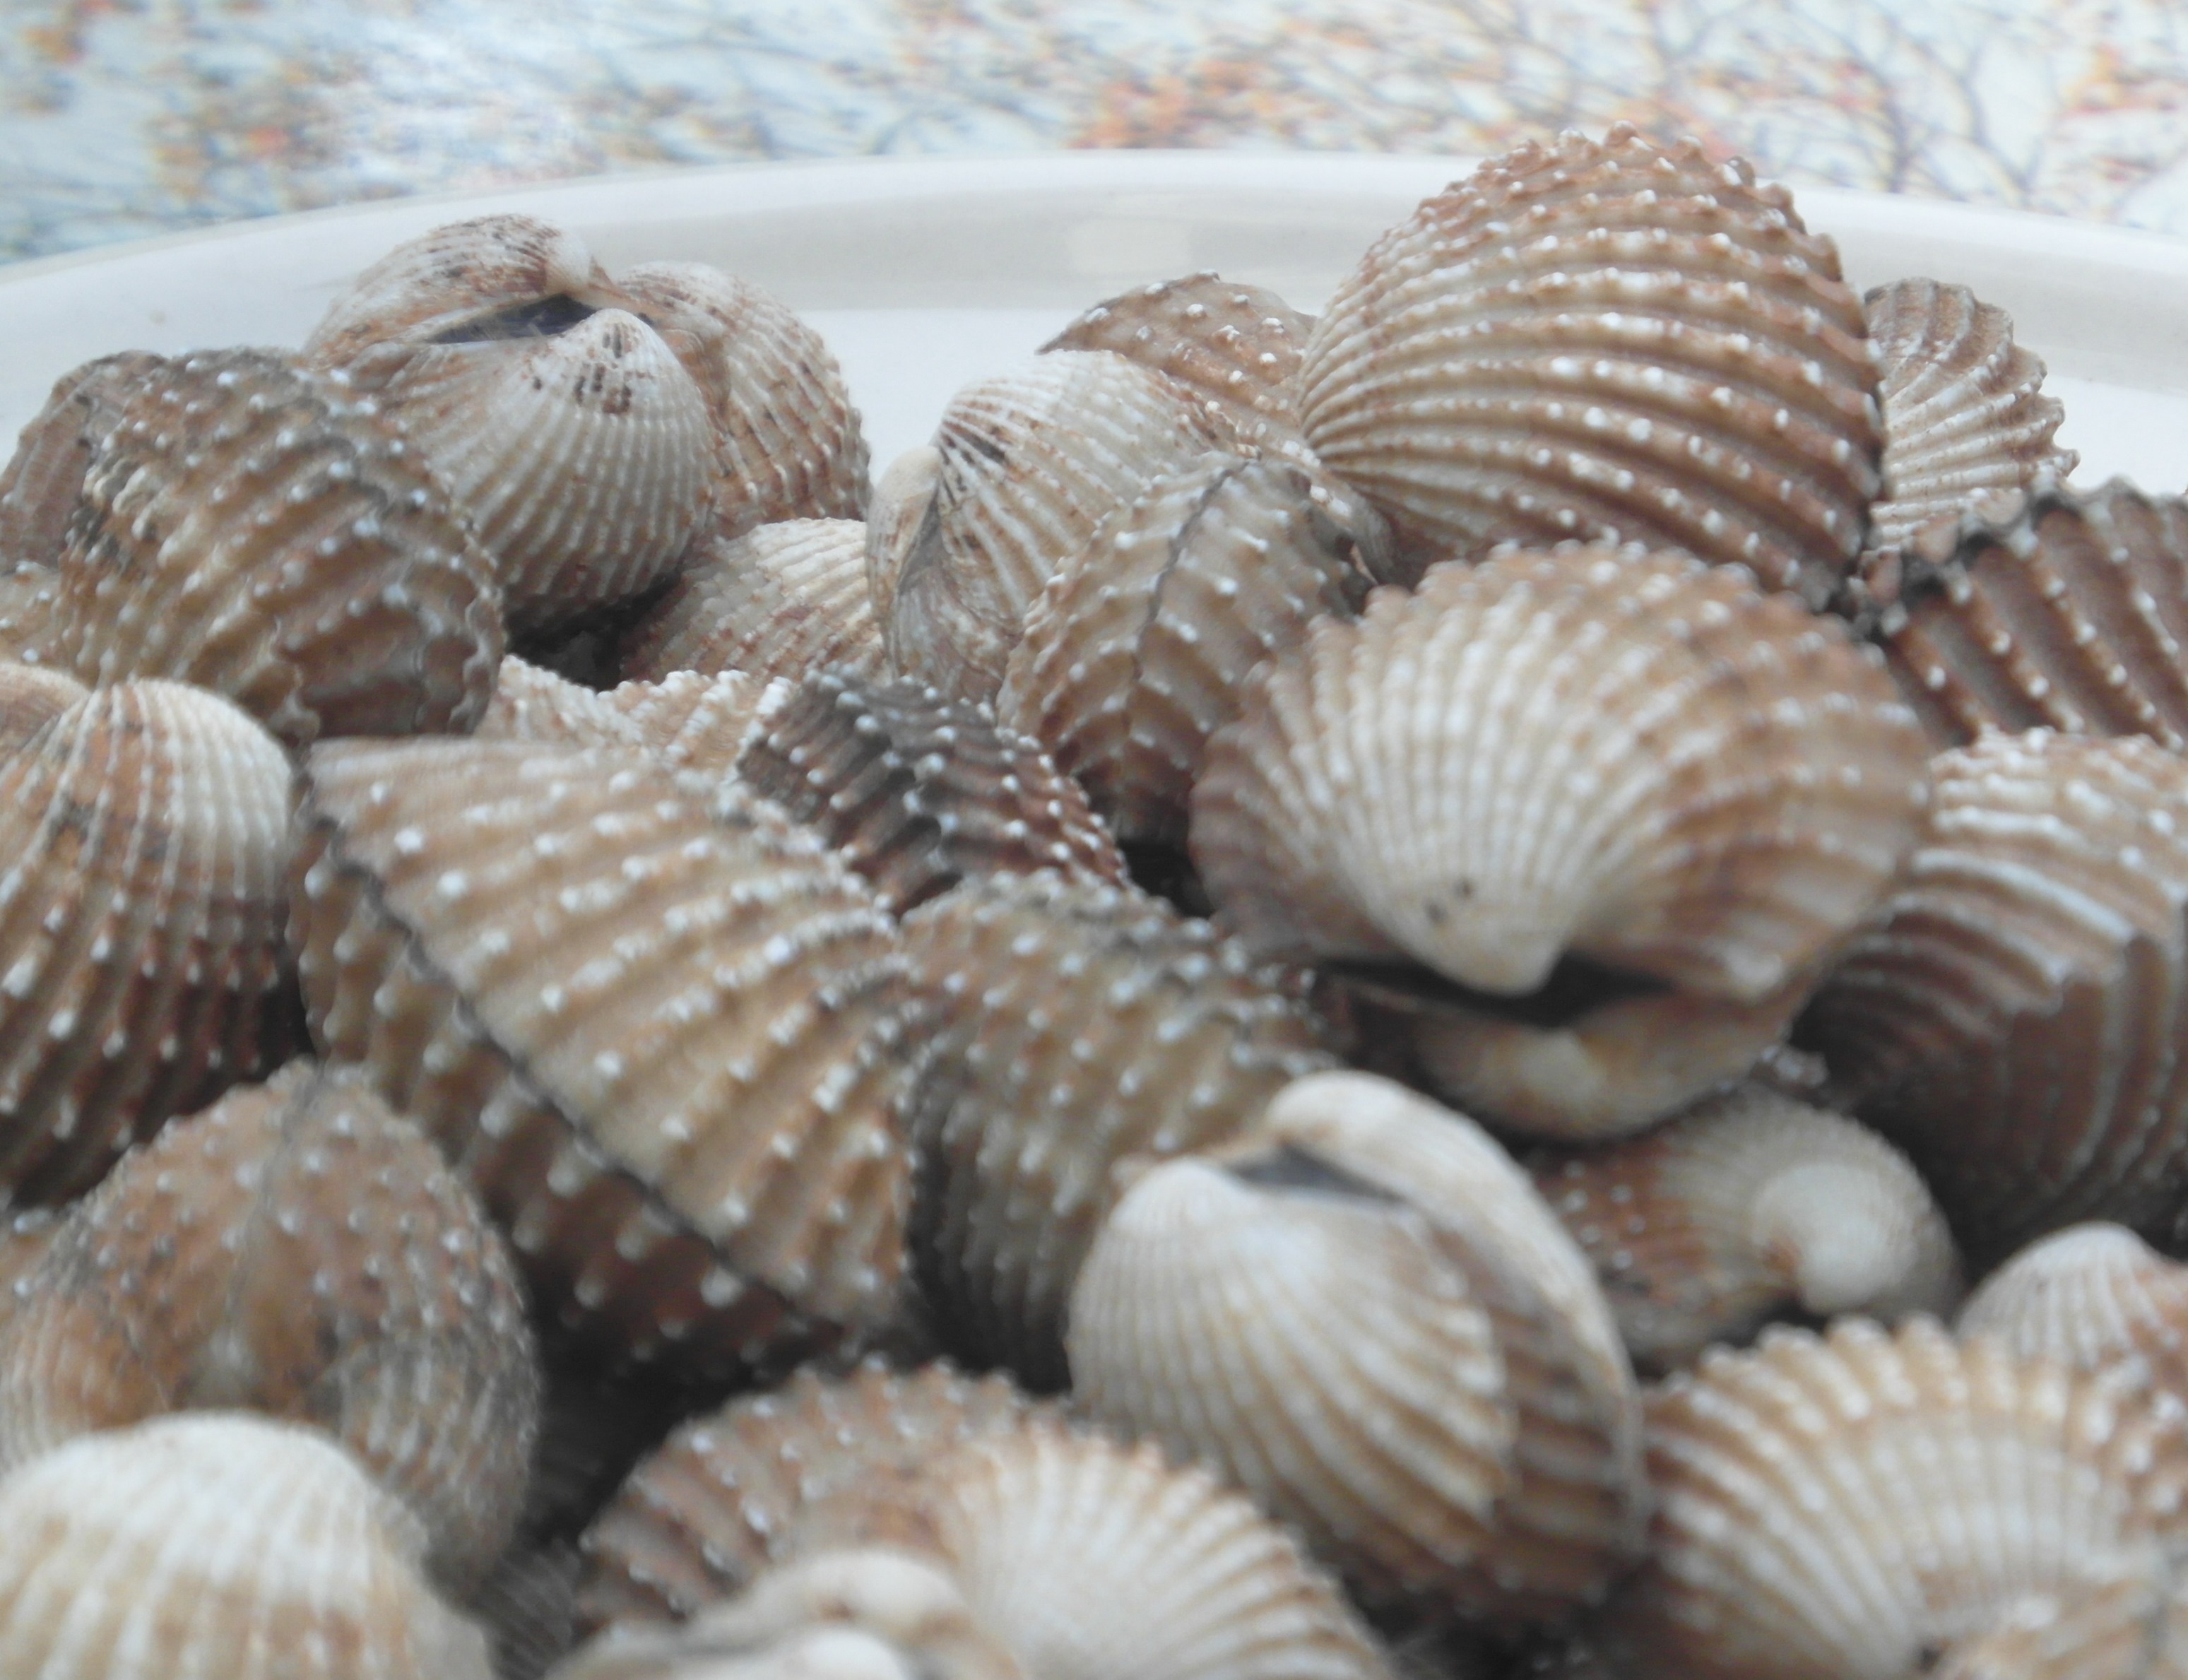 Cockles photo